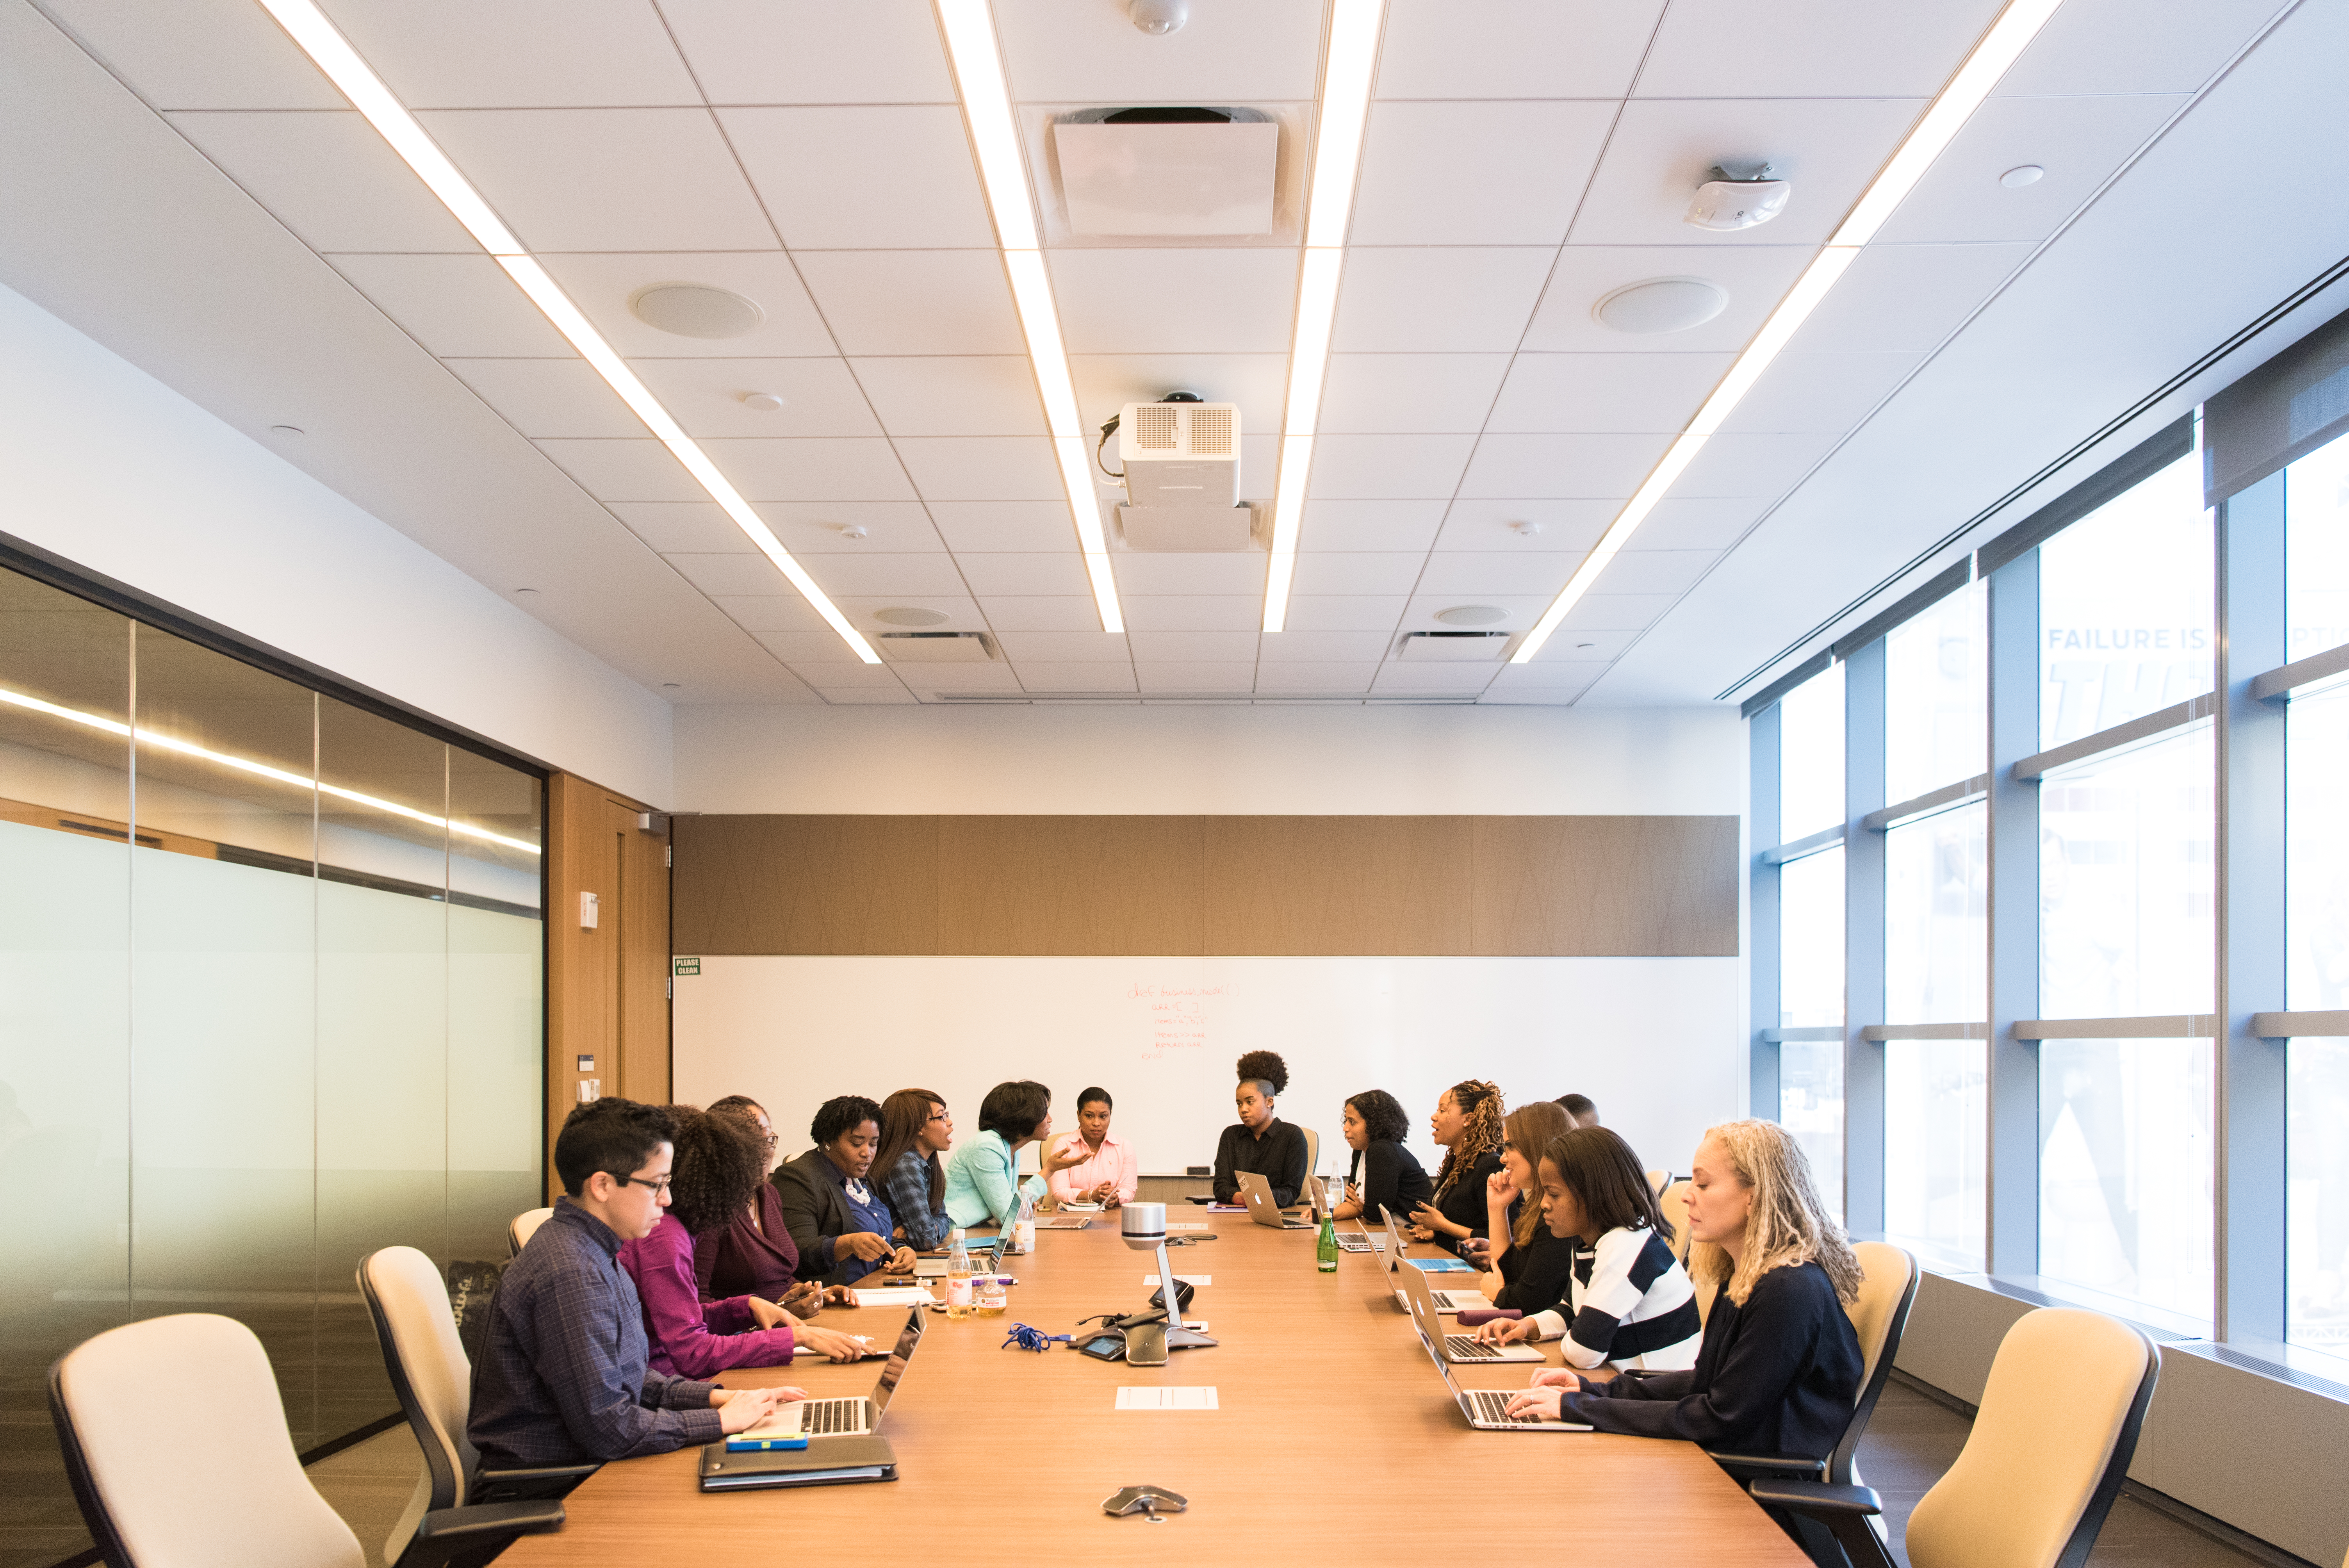 [IMAGE] A group of mostly female-presenting people of color with open laptops sitting around a meeting table